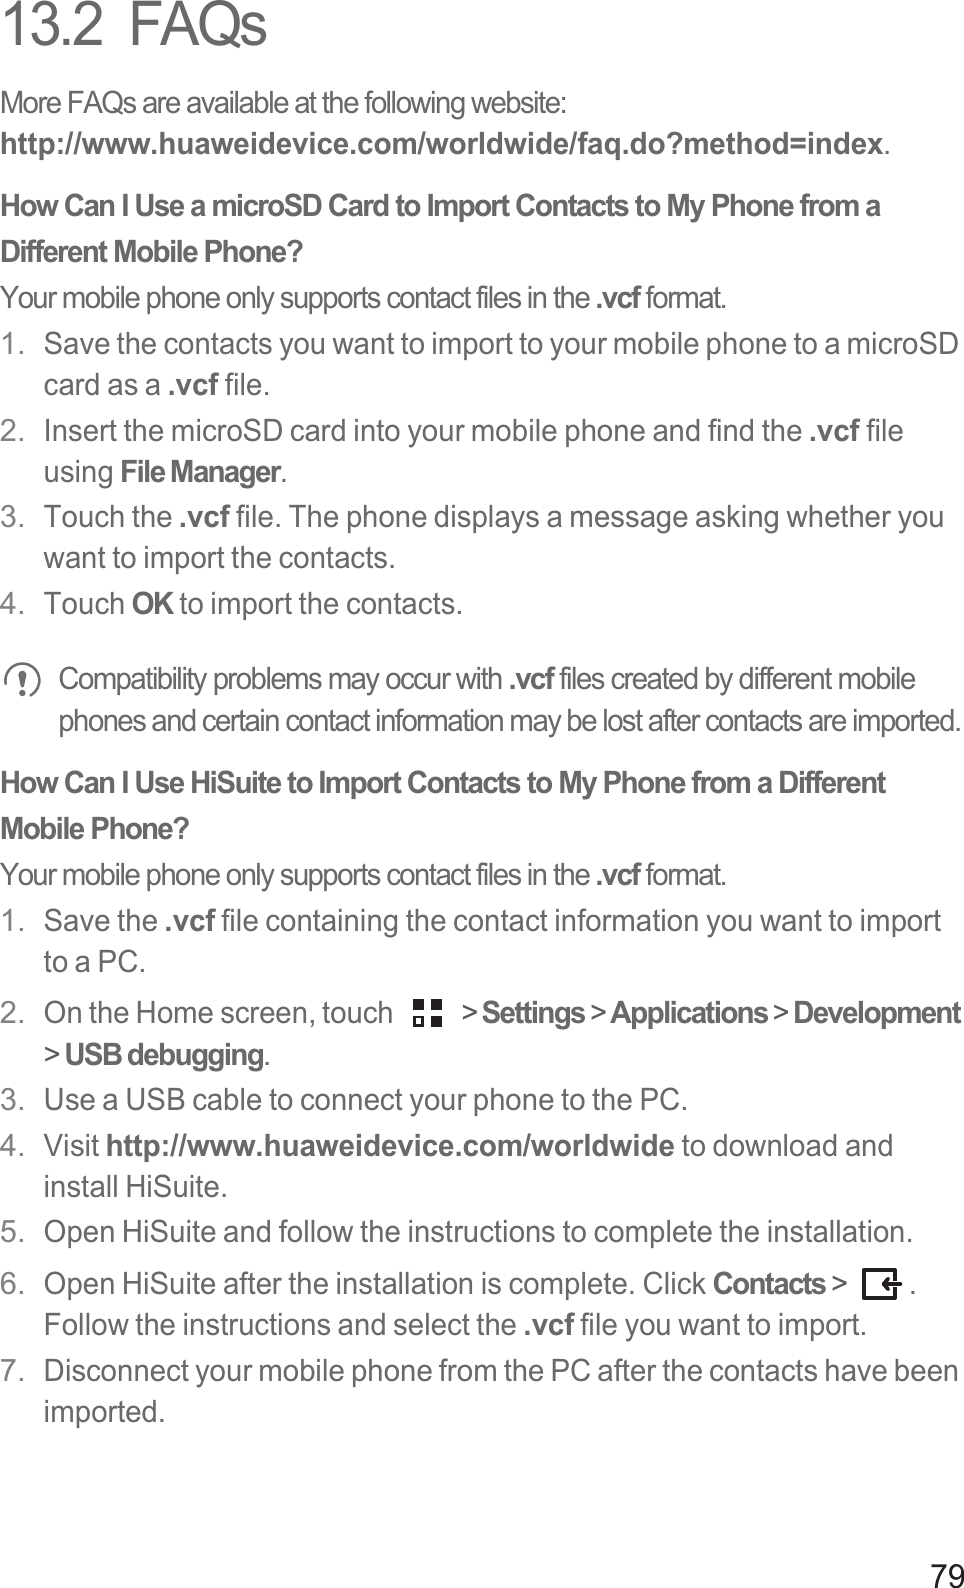 7913.2  FAQsMore FAQs are available at the following website: http://www.huaweidevice.com/worldwide/faq.do?method=index.How Can I Use a microSD Card to Import Contacts to My Phone from a Different Mobile Phone?Your mobile phone only supports contact files in the .vcf format.1.Save the contacts you want to import to your mobile phone to a microSD card as a .vcf file.2.Insert the microSD card into your mobile phone and find the .vcf file using File Manager.3.Touch the .vcf file. The phone displays a message asking whether you want to import the contacts.4.Touch OK to import the contacts.Compatibility problems may occur with .vcf files created by different mobile phones and certain contact information may be lost after contacts are imported. How Can I Use HiSuite to Import Contacts to My Phone from a Different Mobile Phone?Your mobile phone only supports contact files in the .vcf format.1.Save the .vcf file containing the contact information you want to import to a PC.2.On the Home screen, touch   &gt; Settings &gt; Applications &gt; Development&gt;USB debugging.3.Use a USB cable to connect your phone to the PC.4.Visit http://www.huaweidevice.com/worldwide to download and install HiSuite.5.Open HiSuite and follow the instructions to complete the installation.6.Open HiSuite after the installation is complete. Click Contacts &gt;  .Follow the instructions and select the .vcf file you want to import.7.Disconnect your mobile phone from the PC after the contacts have been imported.